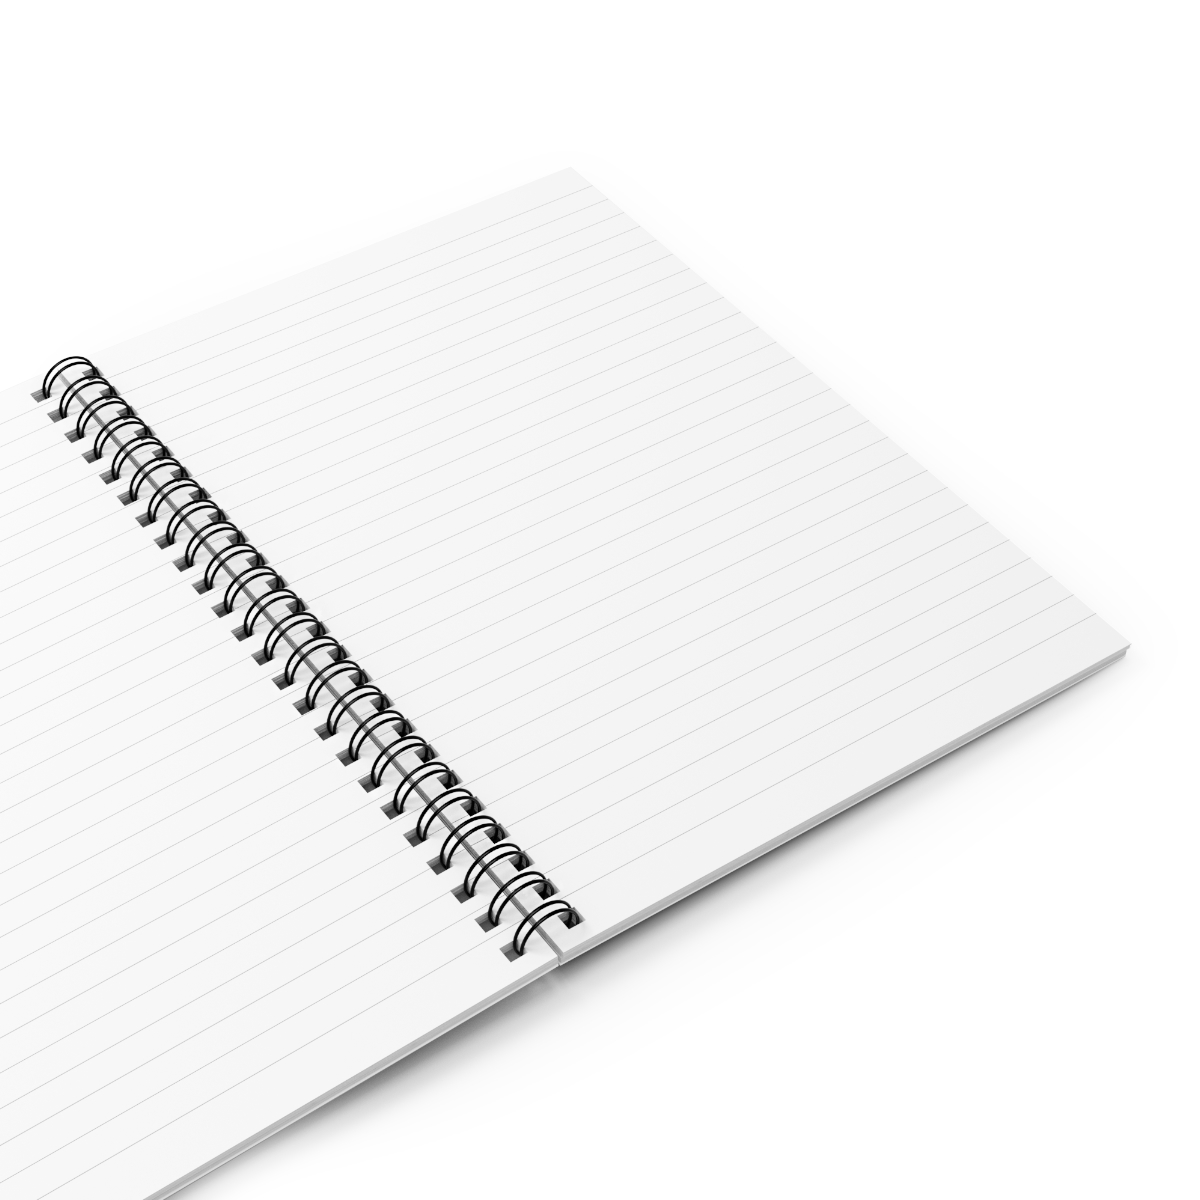 Cup of Justice Spiral Notebook - Ruled Line product thumbnail image